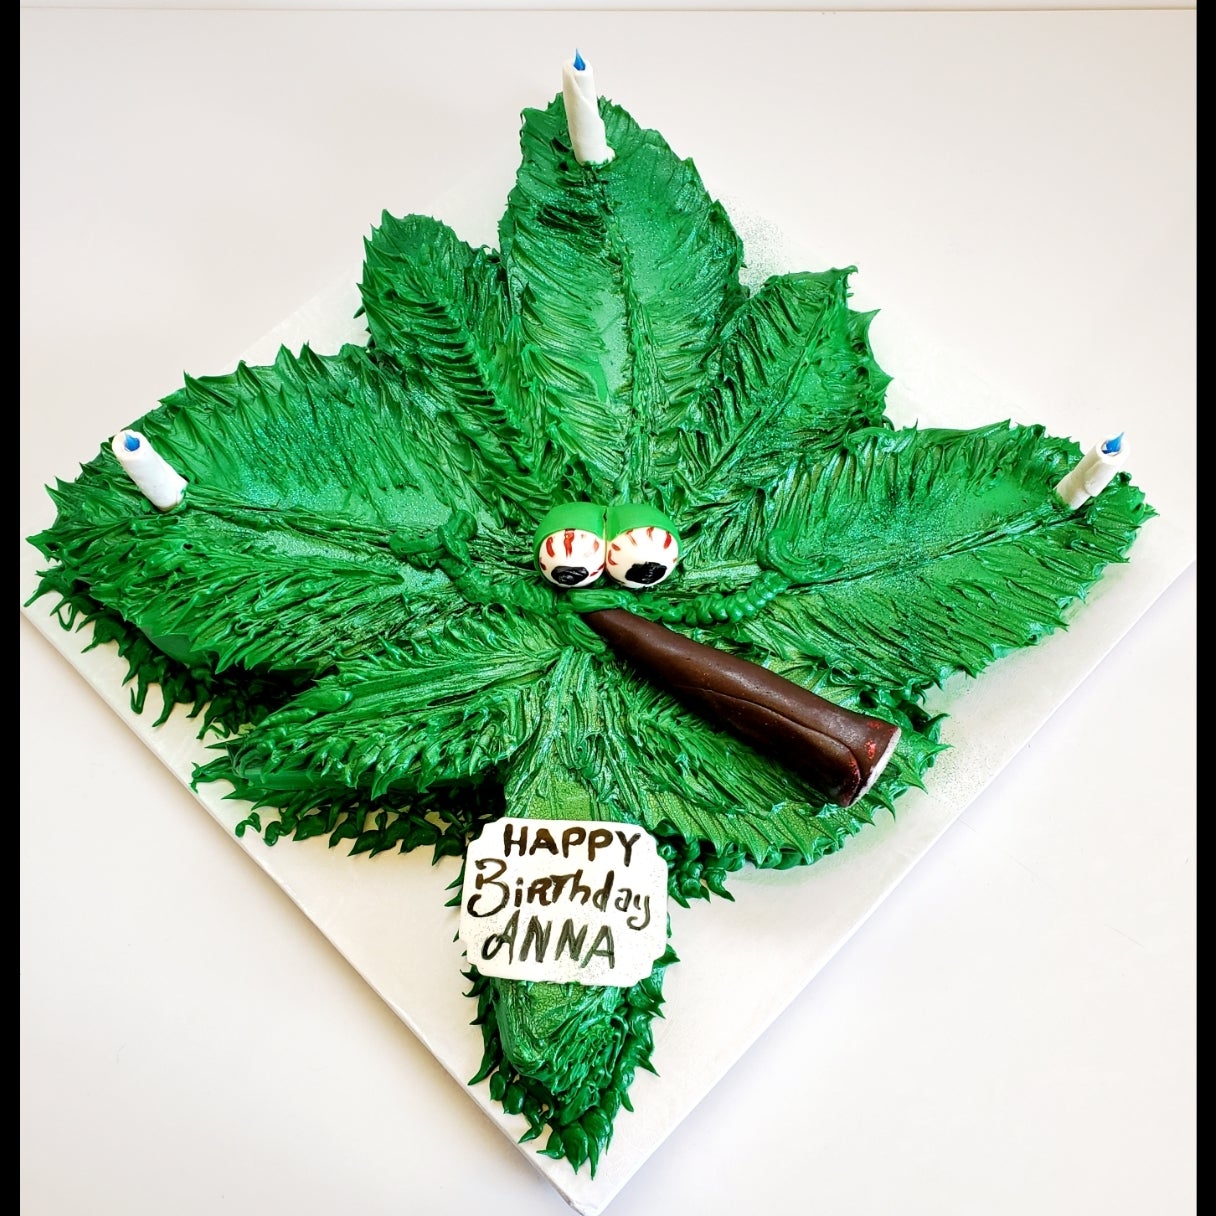 420 Joint and Orange Weed Leaf Novelty Cake Candles – Highly Curated Candles